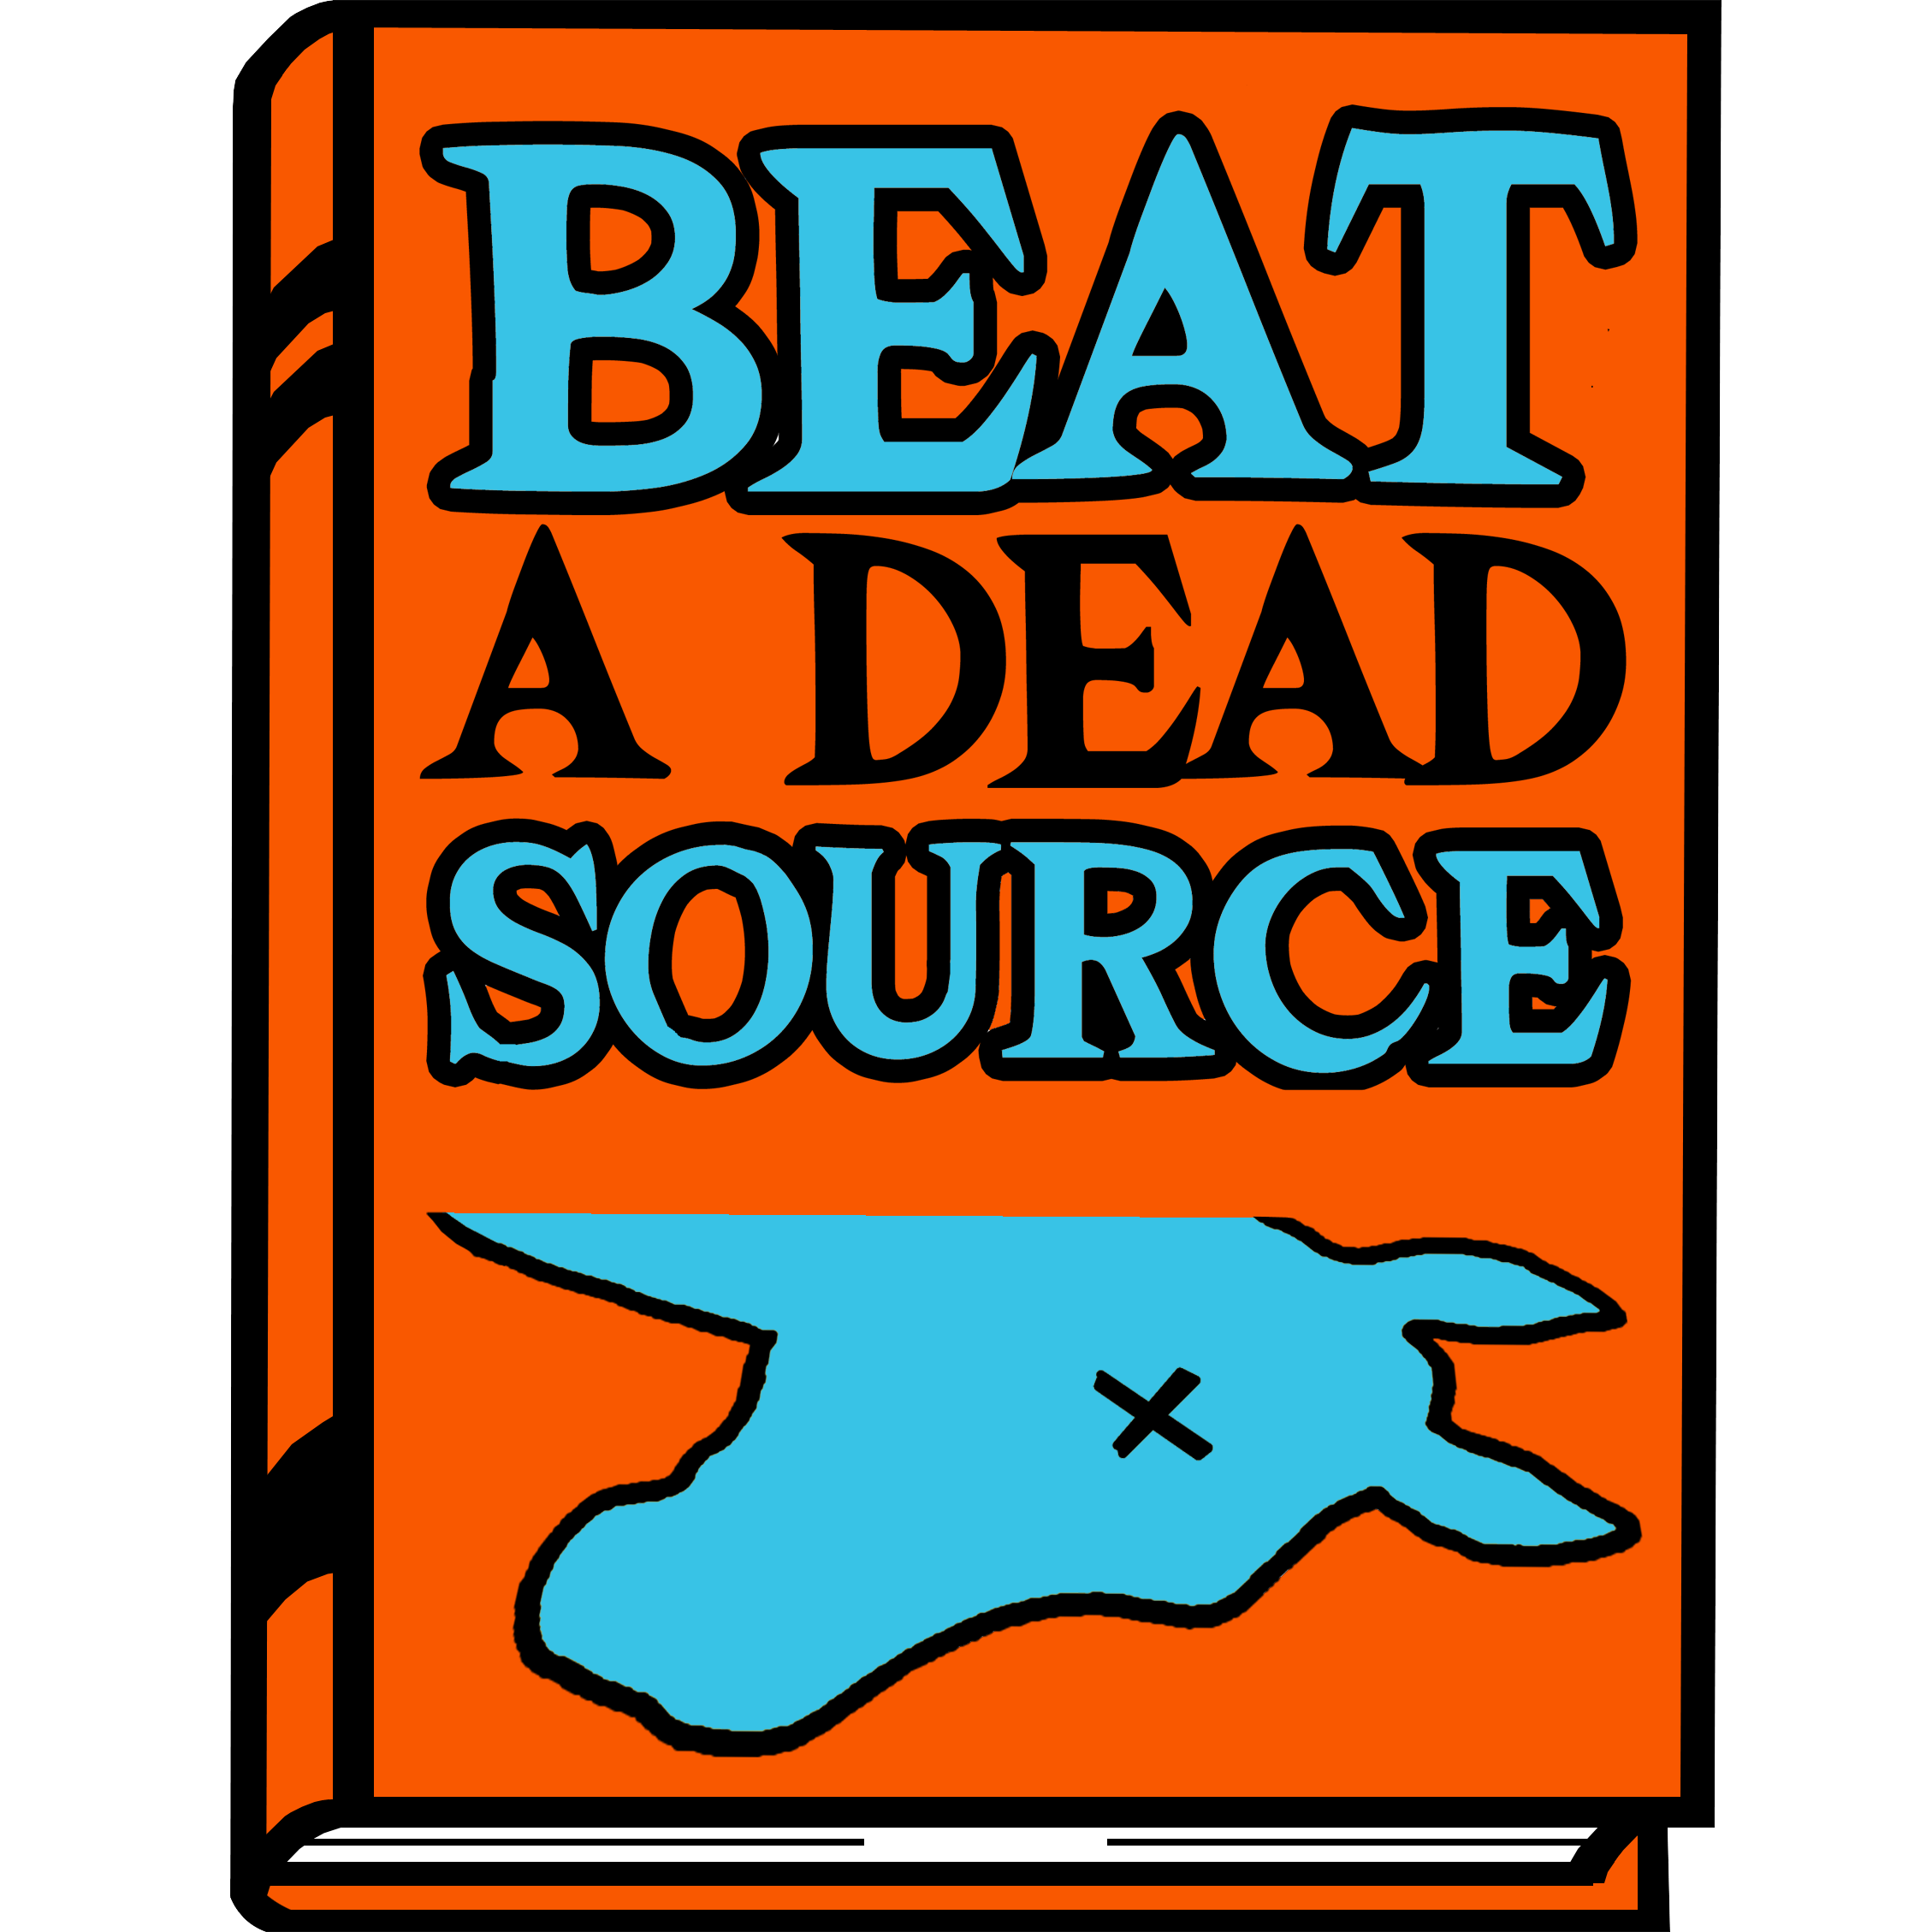 Show artwork for Beat A Dead Source